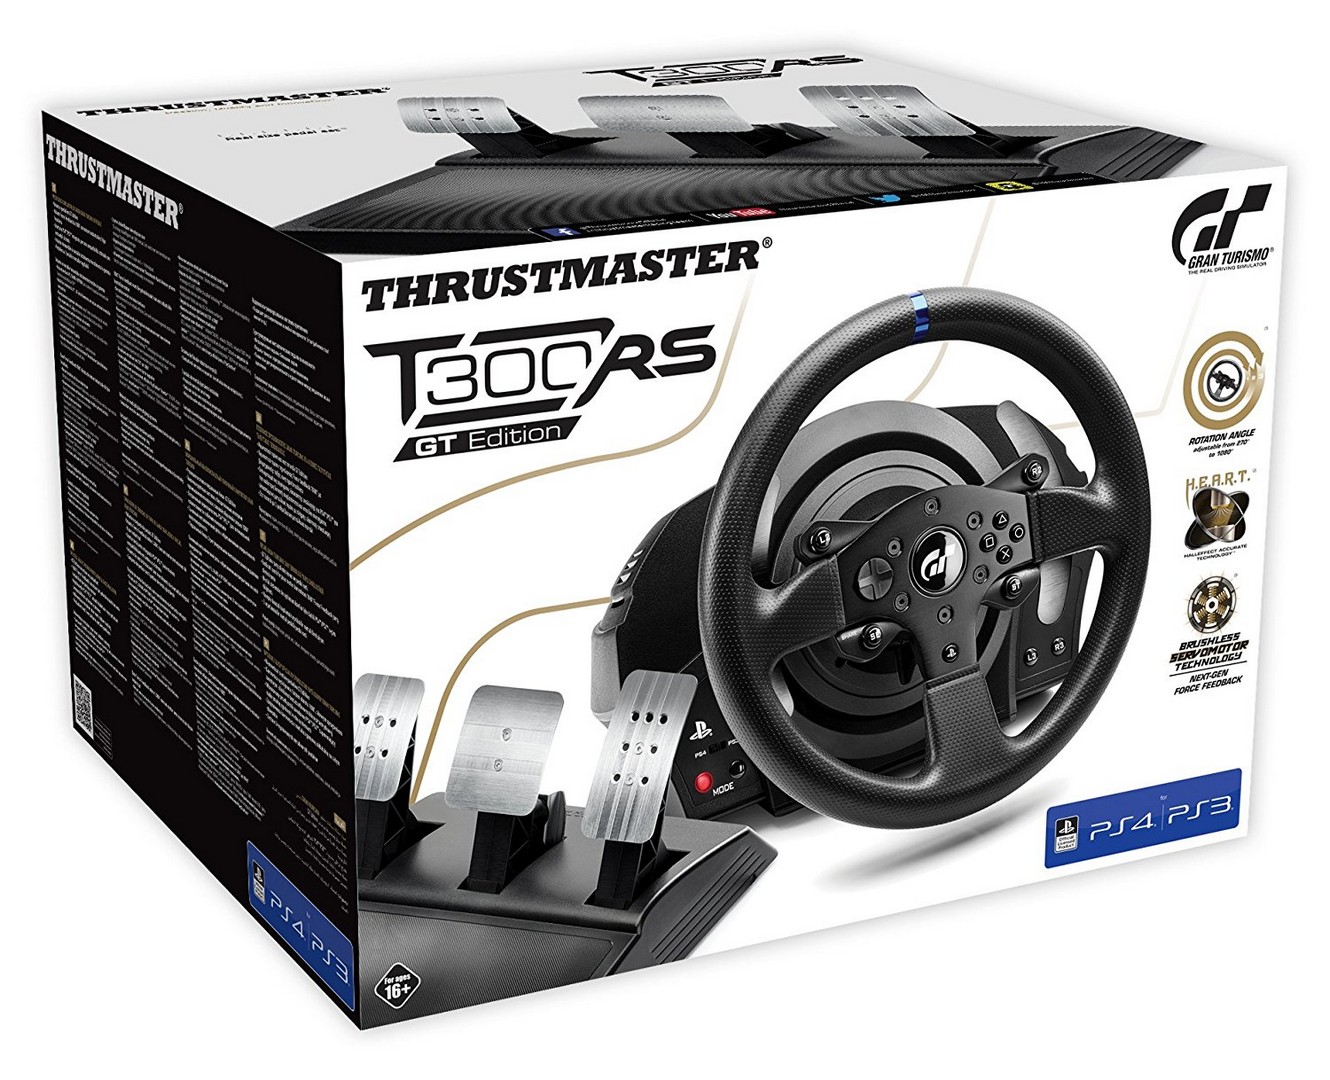 Thrustmaster T300 RS GT Edition Racing Wheel and Pedal Set (PS4, PS3, PC)